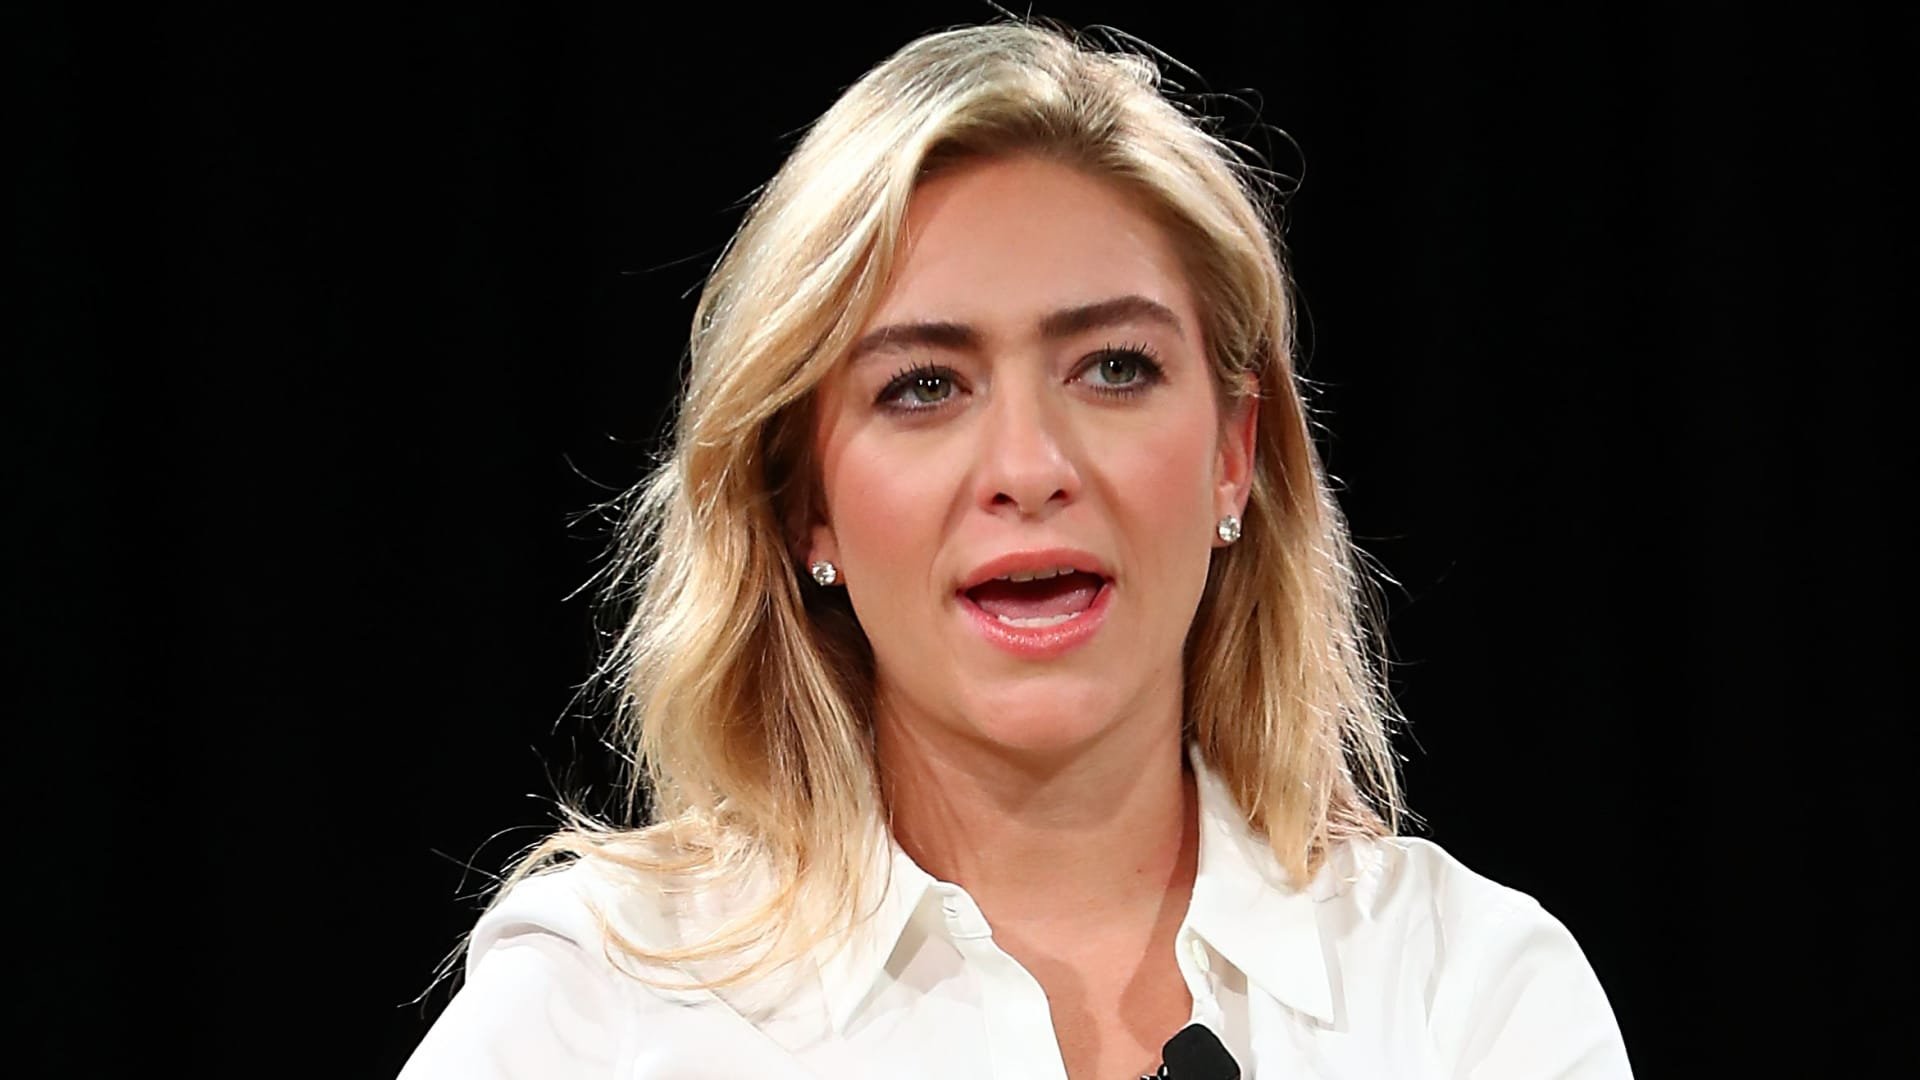 Bumble's IPO may be a feat — but venture capital funding for women is still an uphill battle